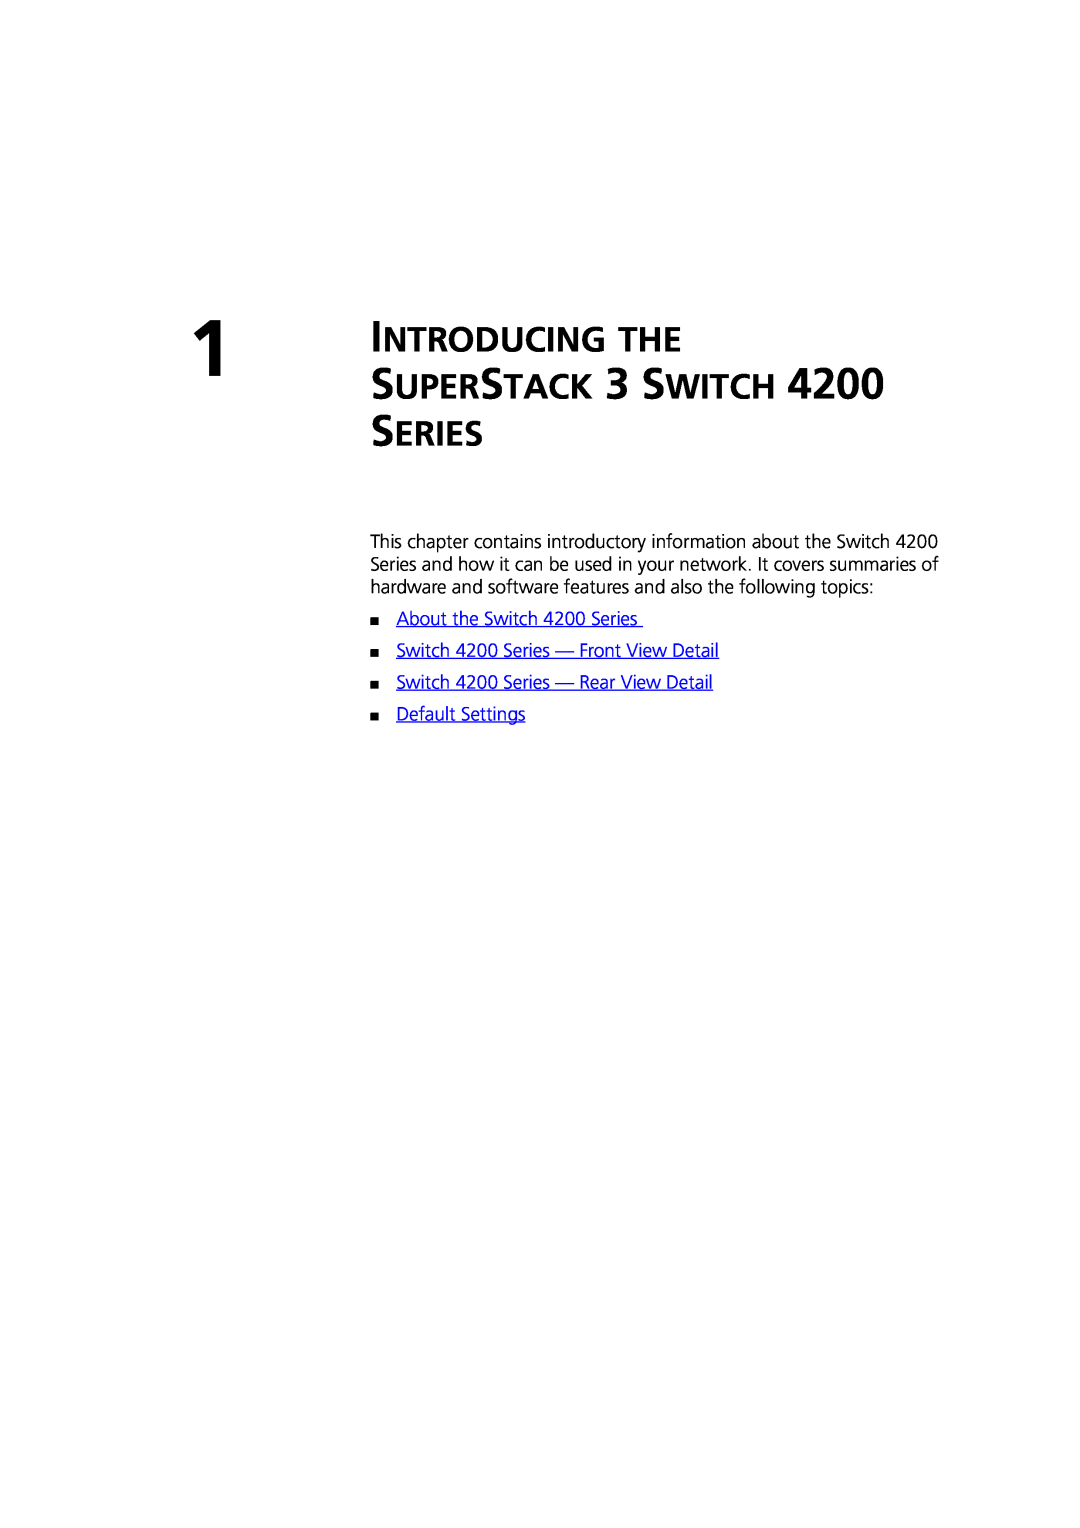 3Com C17304, 3C17300 manual Introducing The, SUPERSTACK 3 SWITCH, Switch 4200 Series - Rear View Detail Default Settings 